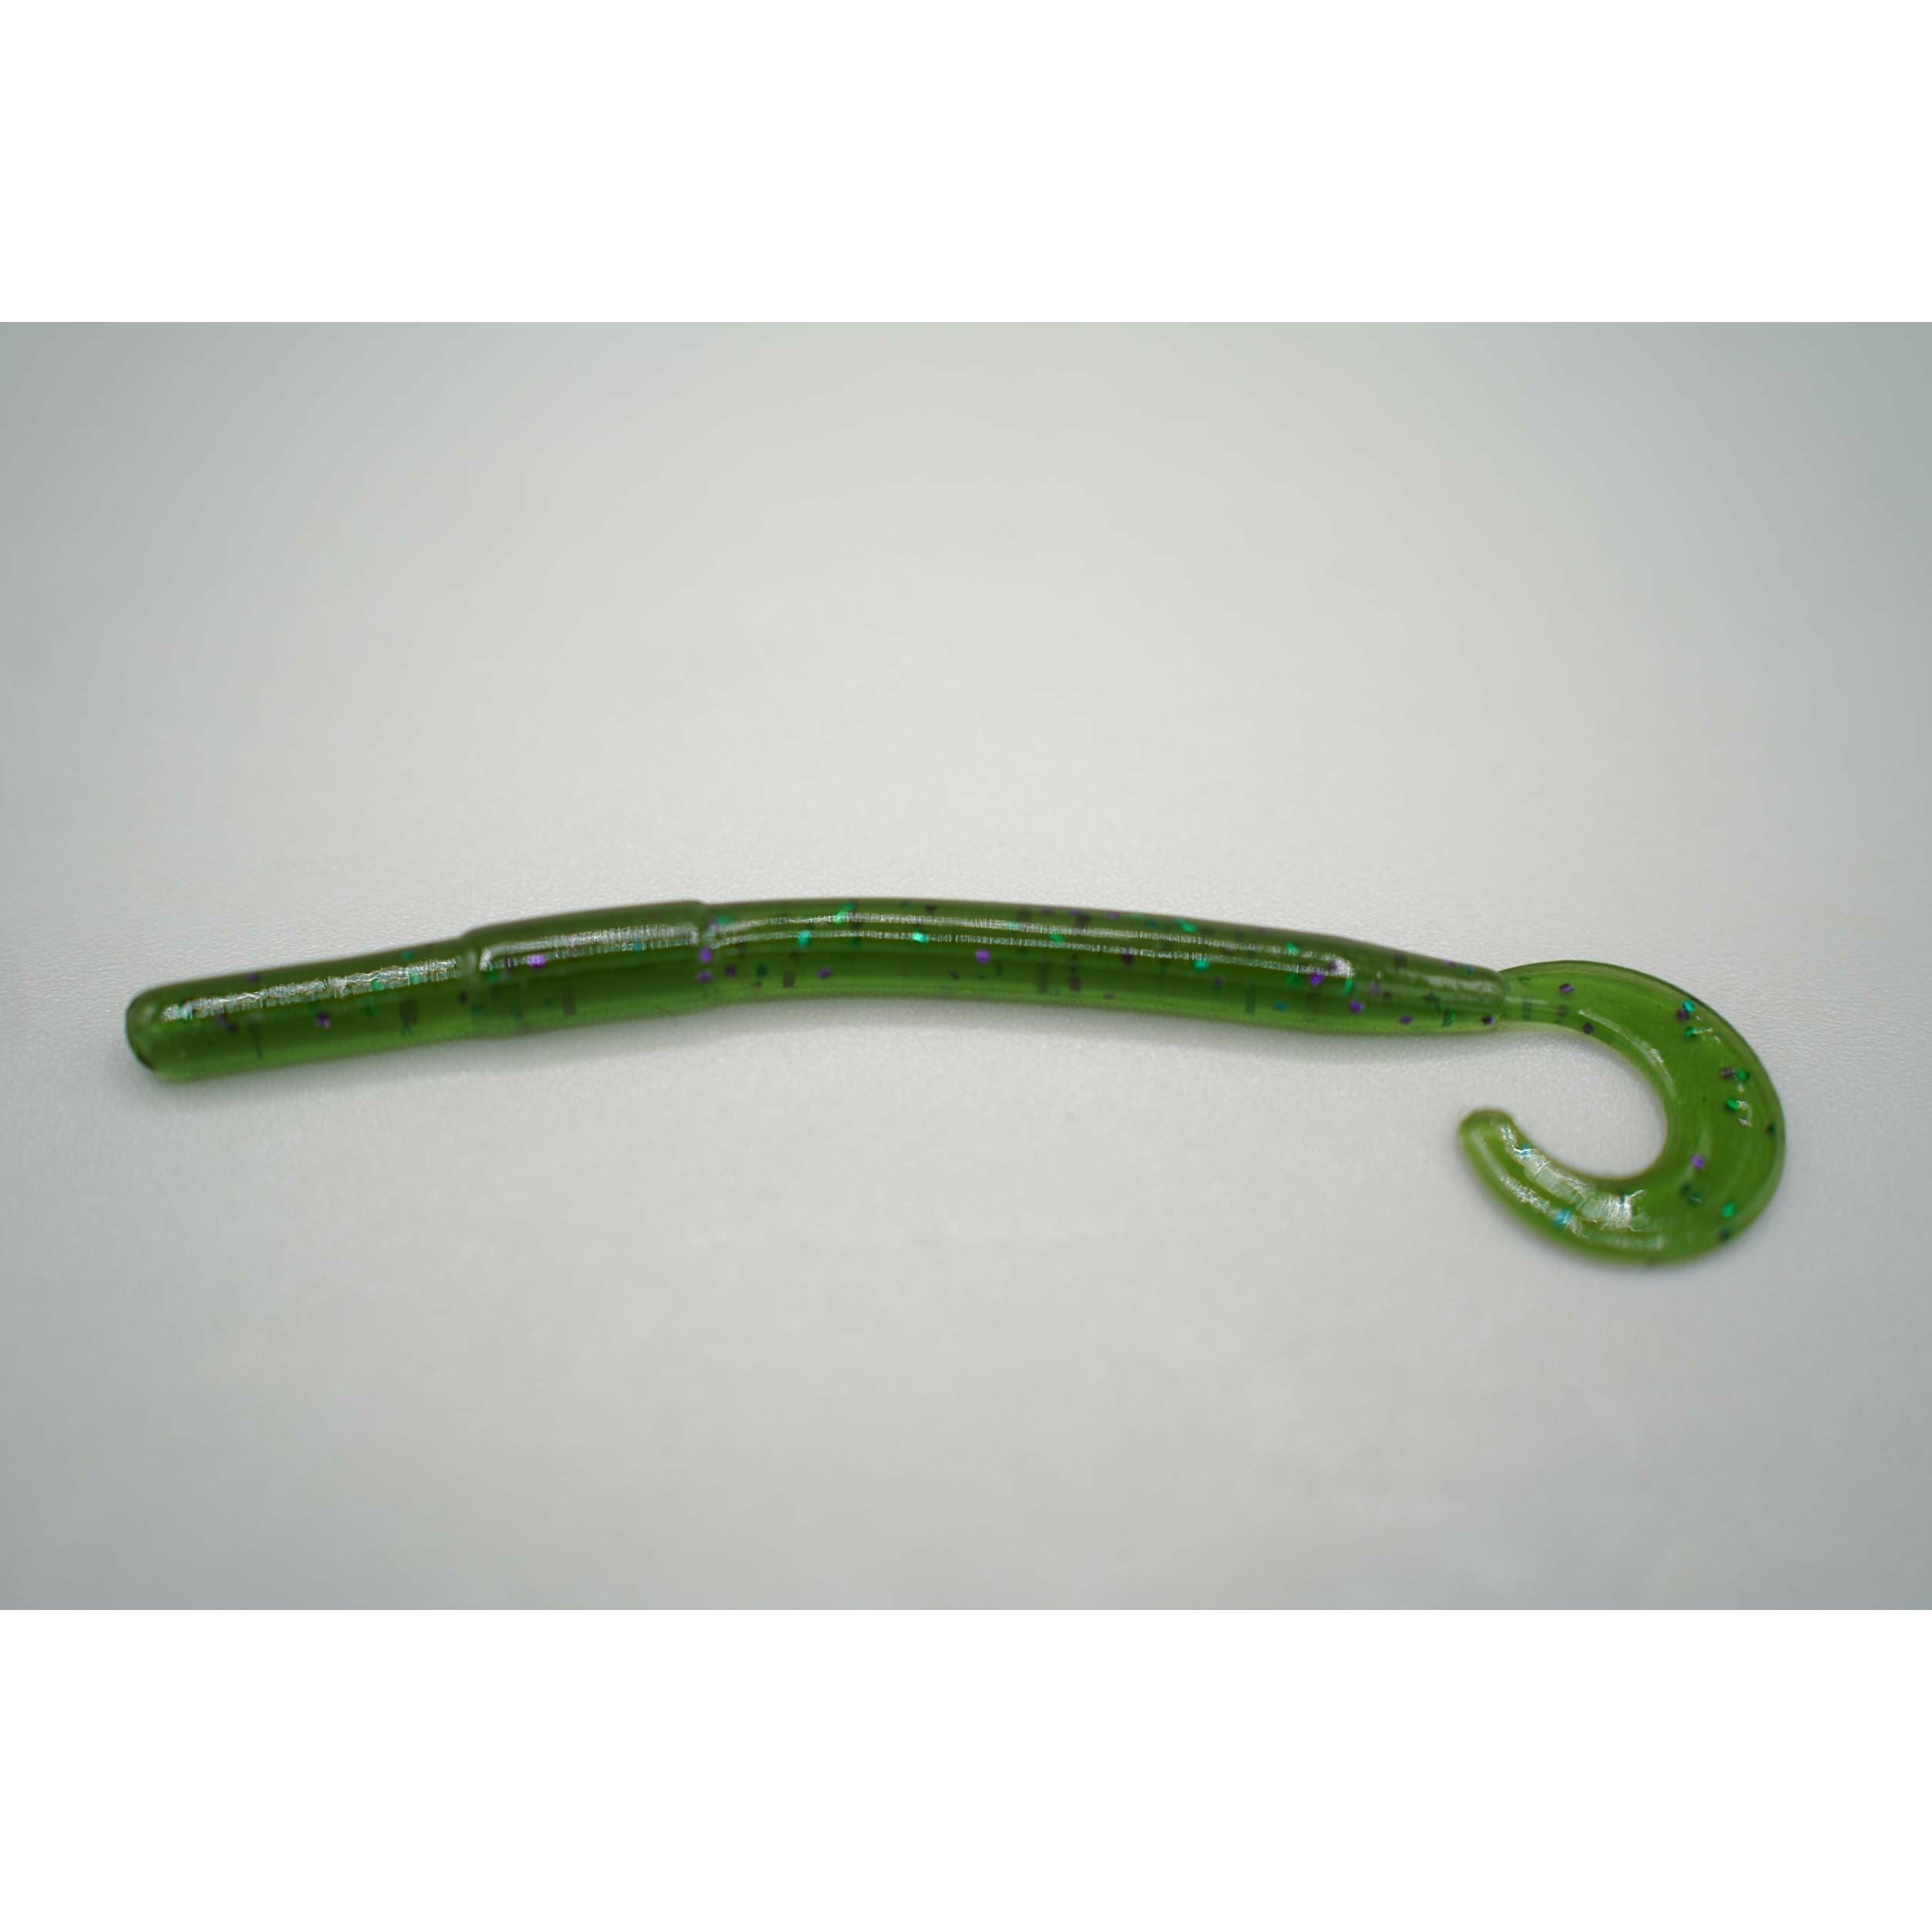 Buy Soft Plastic Worms Online, Bass Fishing Accessories, Soft Plastics  Curly Tail Worms